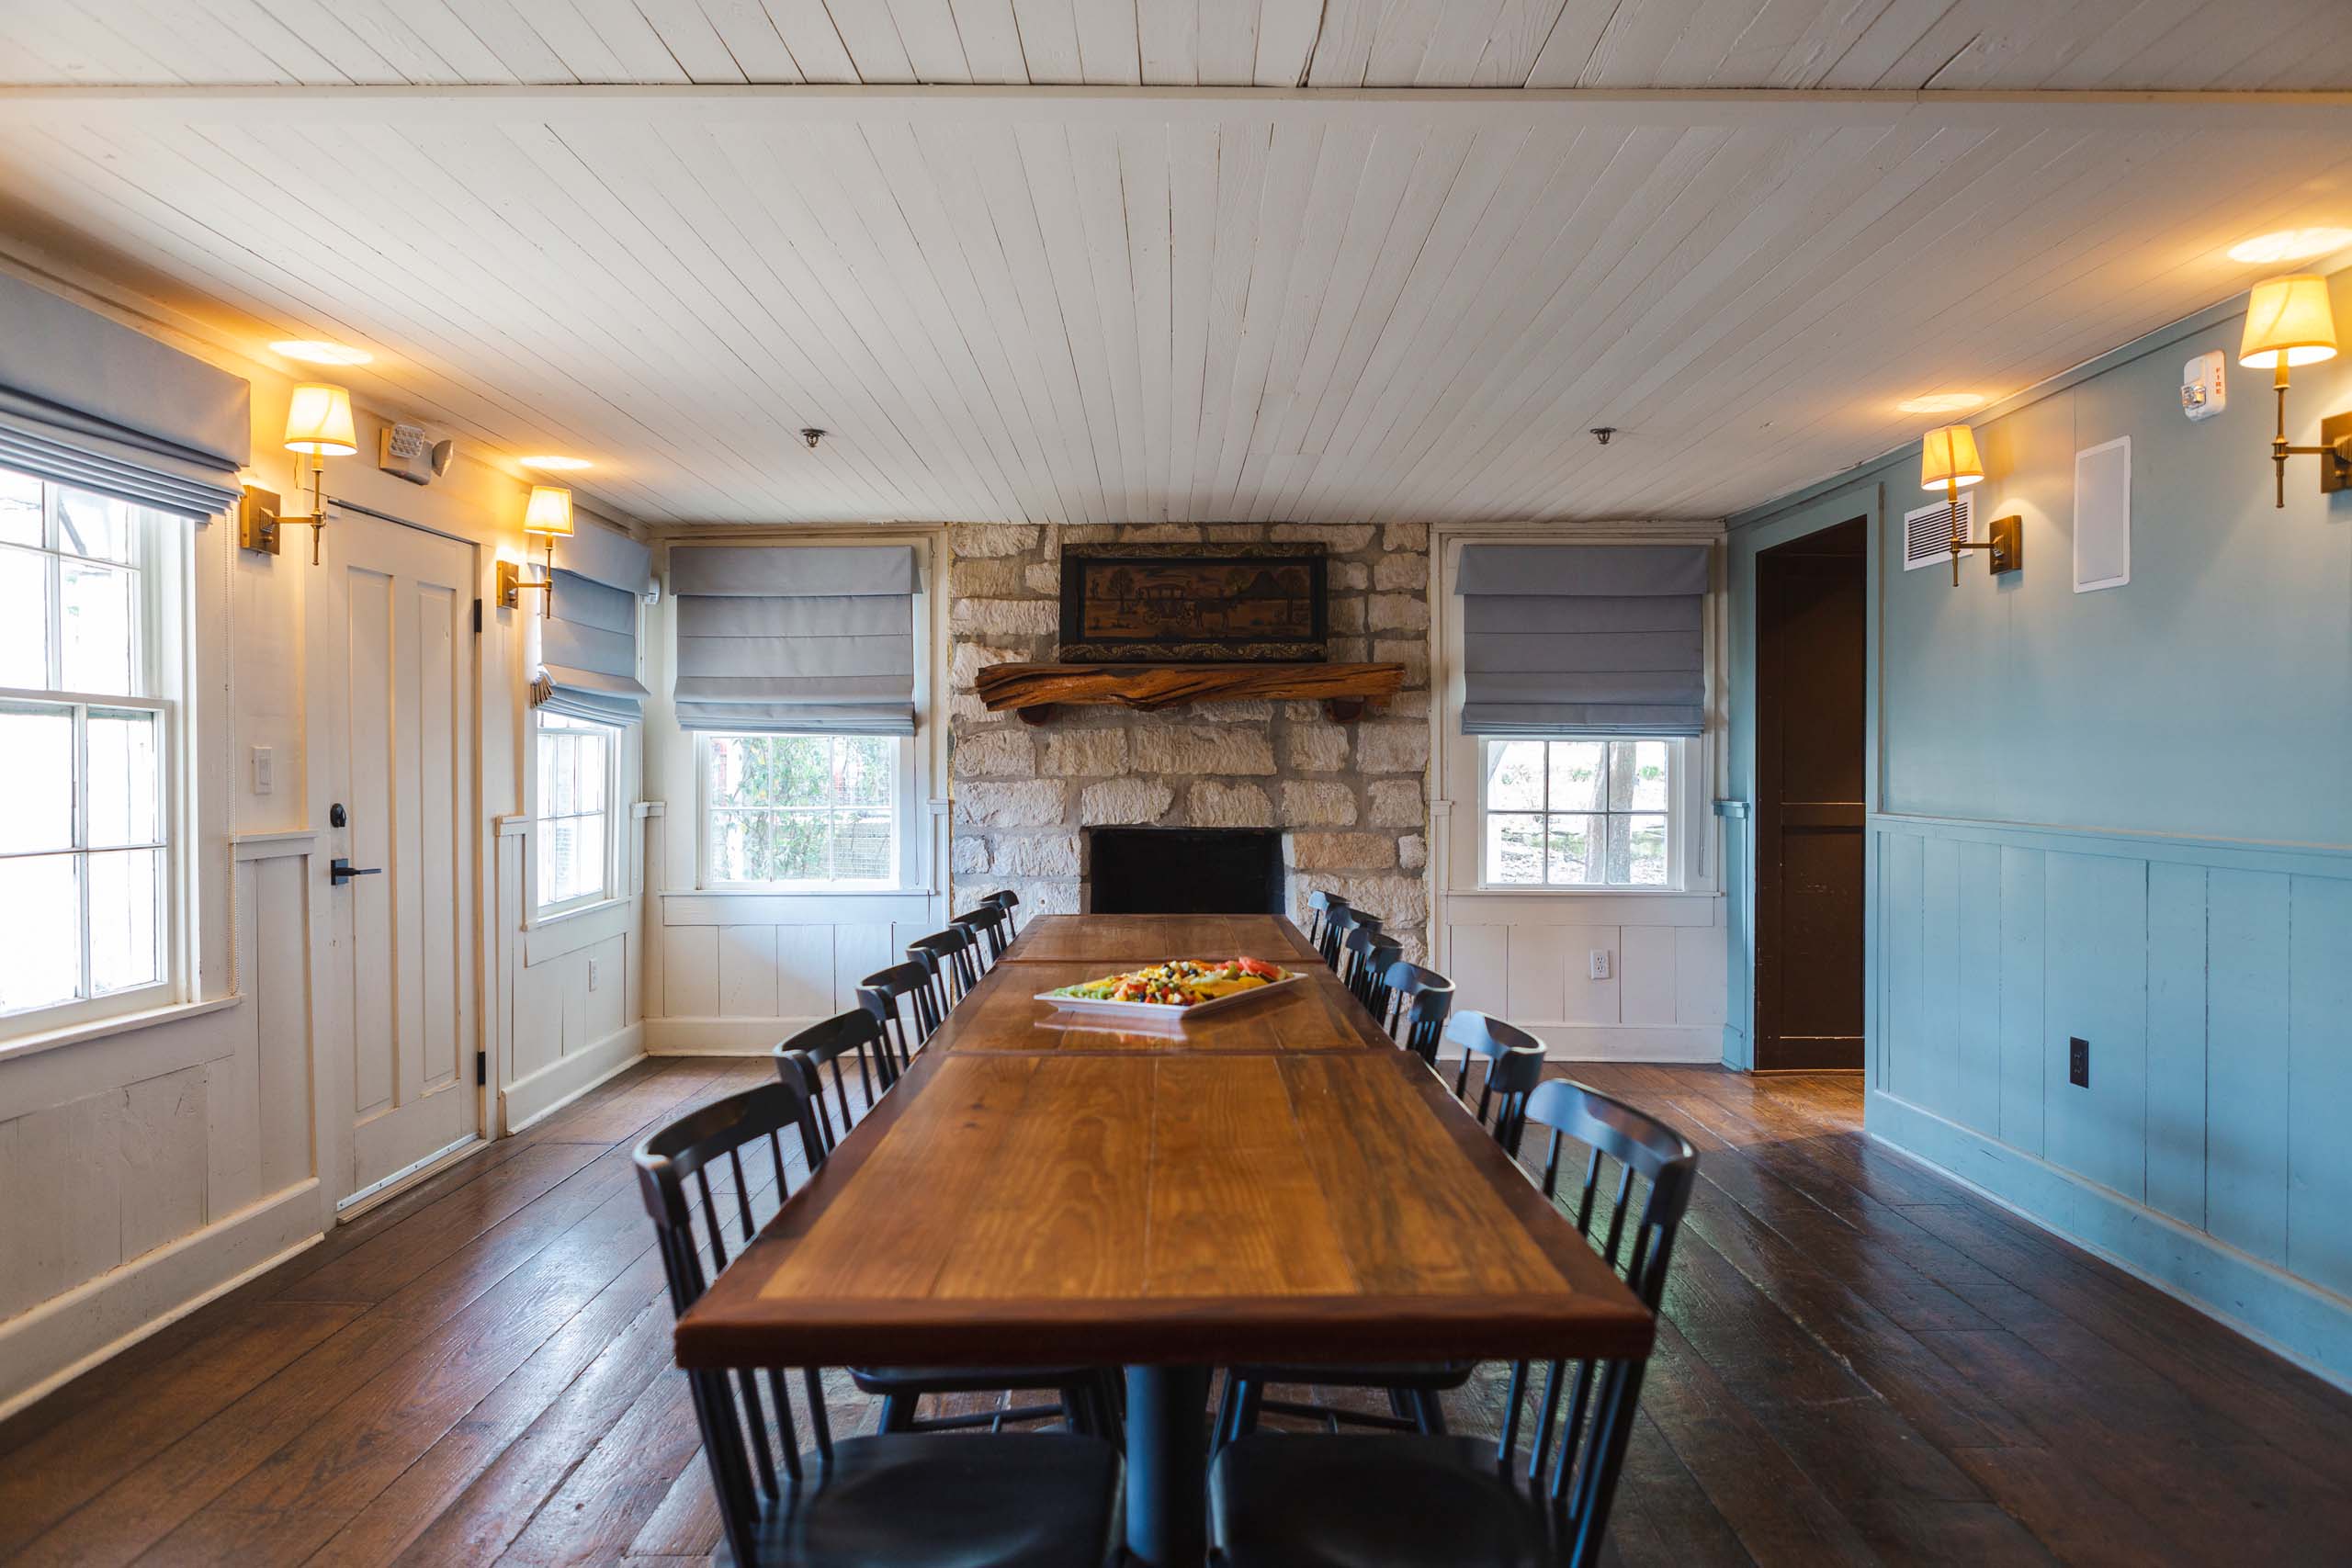 Dining room with a long wooden table and stone fireplace at Stagecoach Inn.